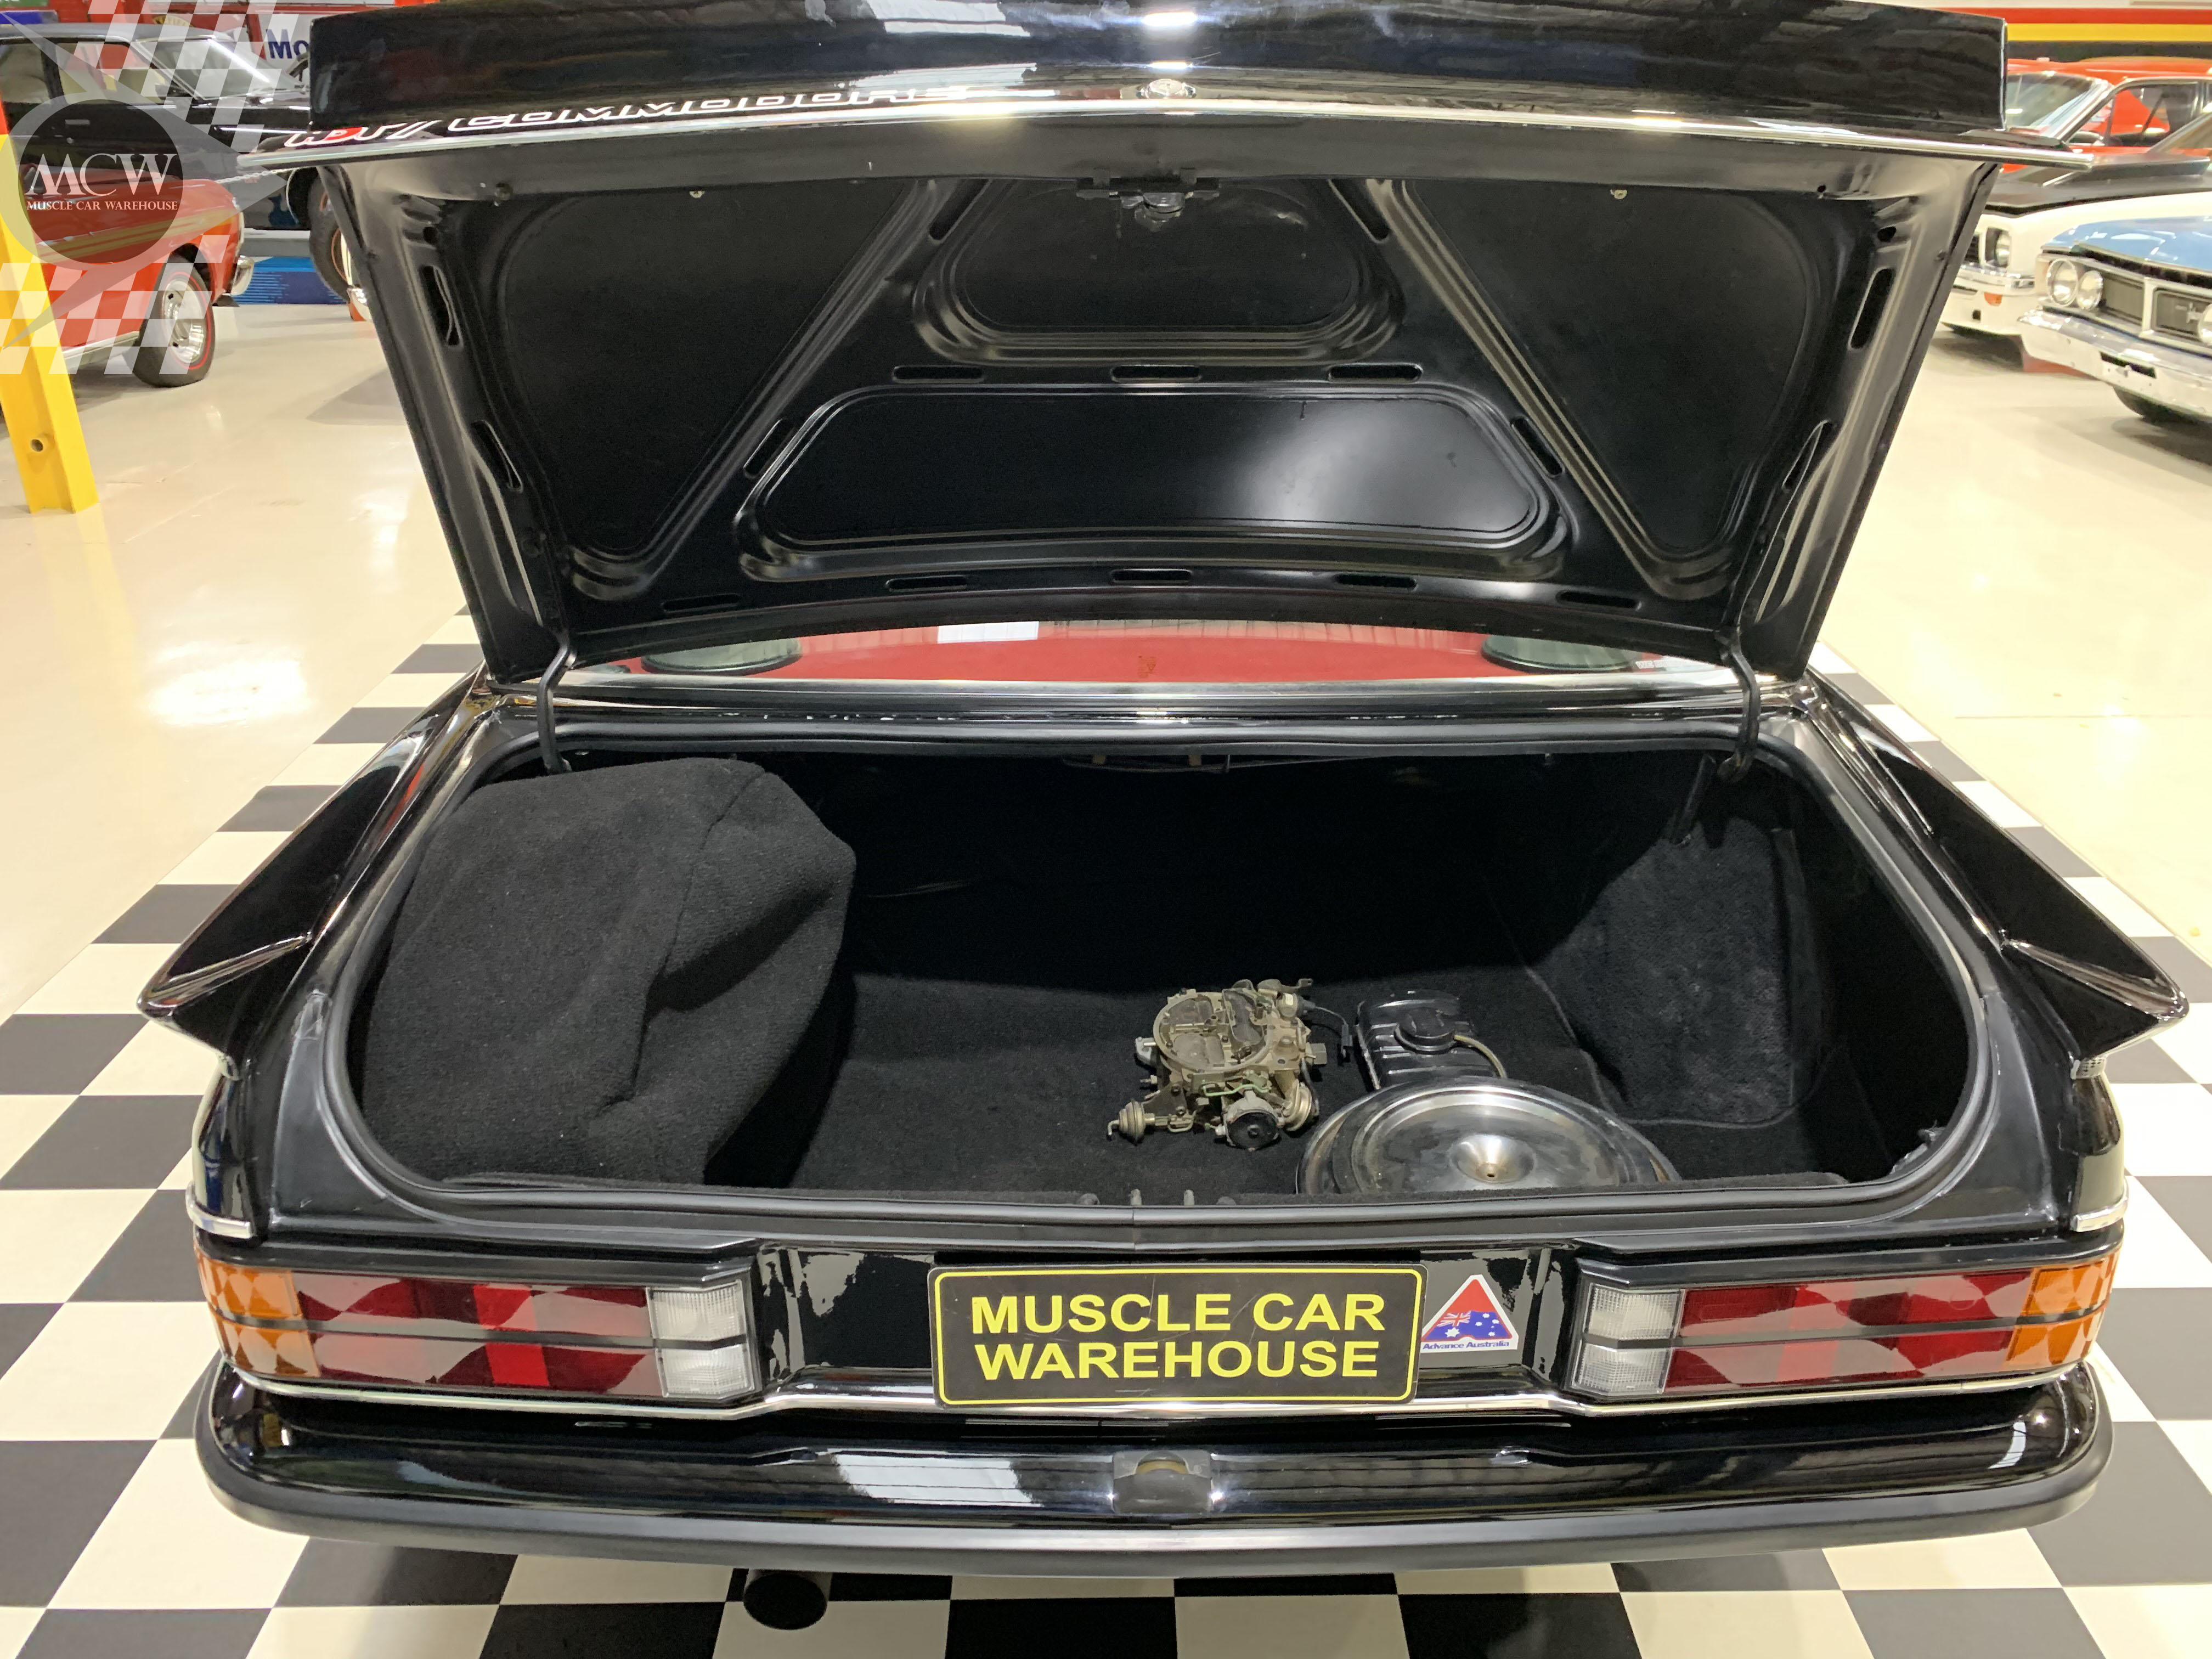 1980 Holden Commodore VC Brock HDT Trunk | Muscle Car Warehouse